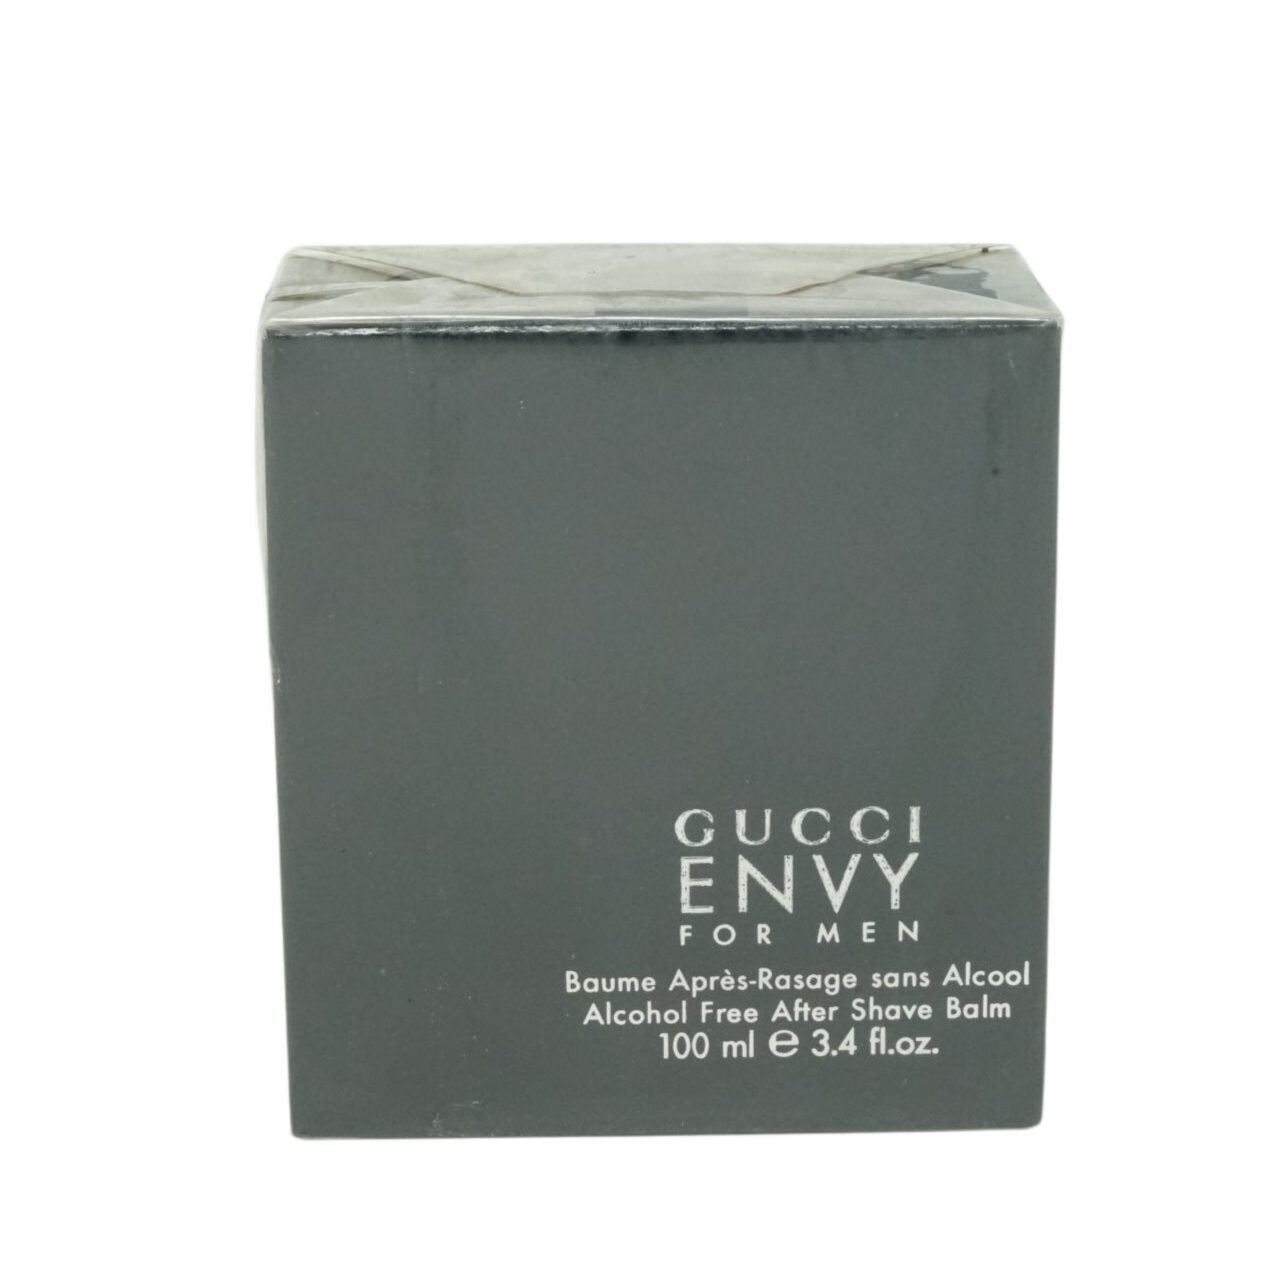 100ml Balm Alkohol Shave Balsam Envy GUCCI Gucci After After-Shave Frei